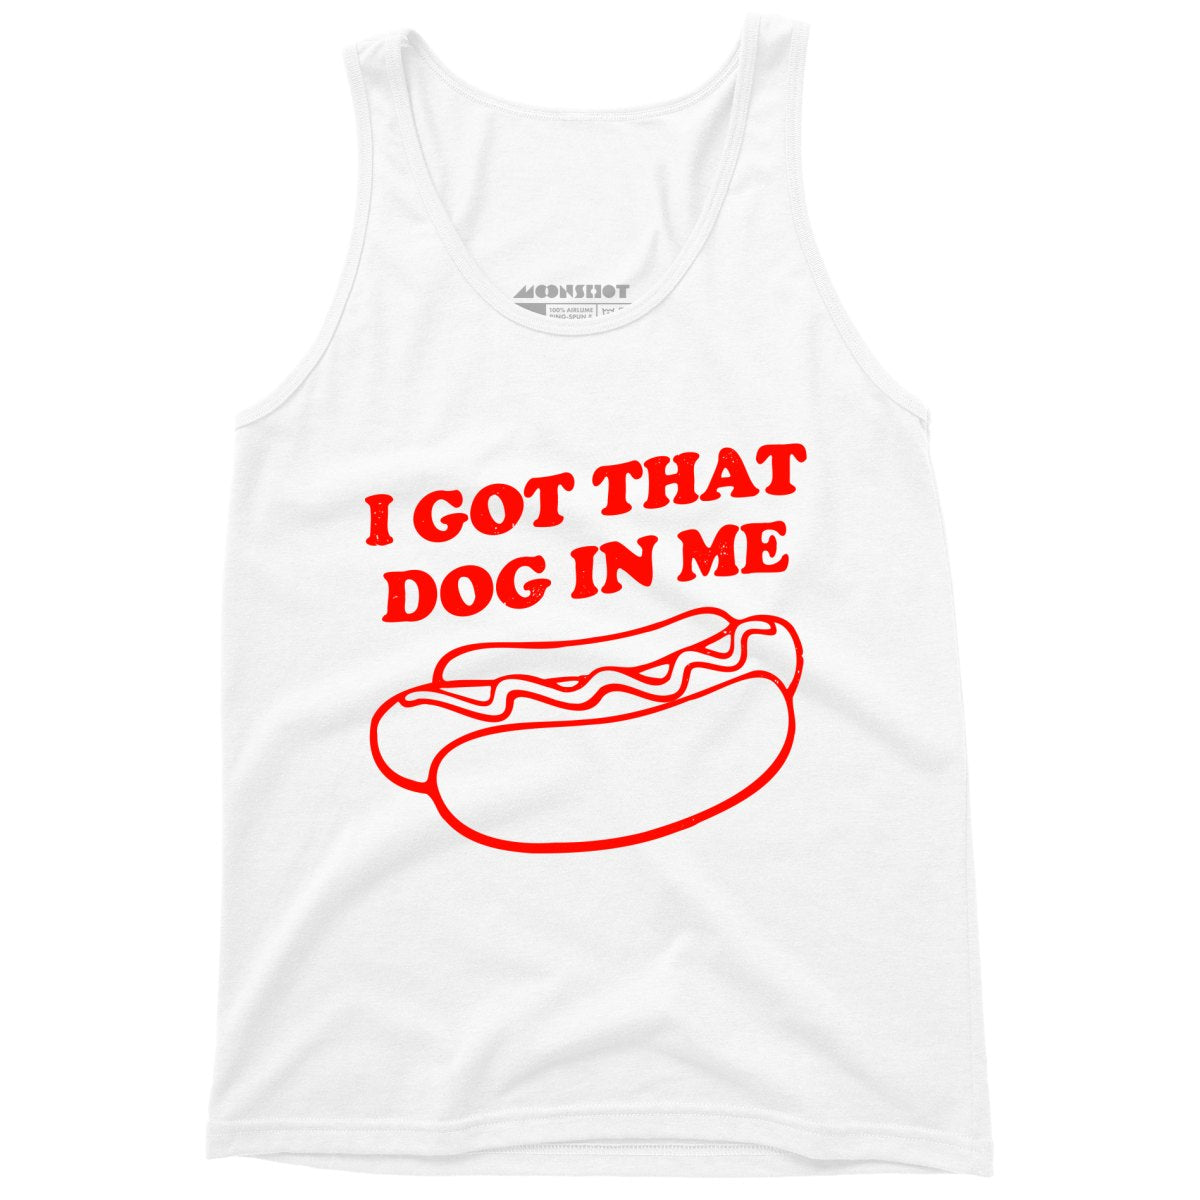 I Got That Dog in Me - Unisex Tank Top